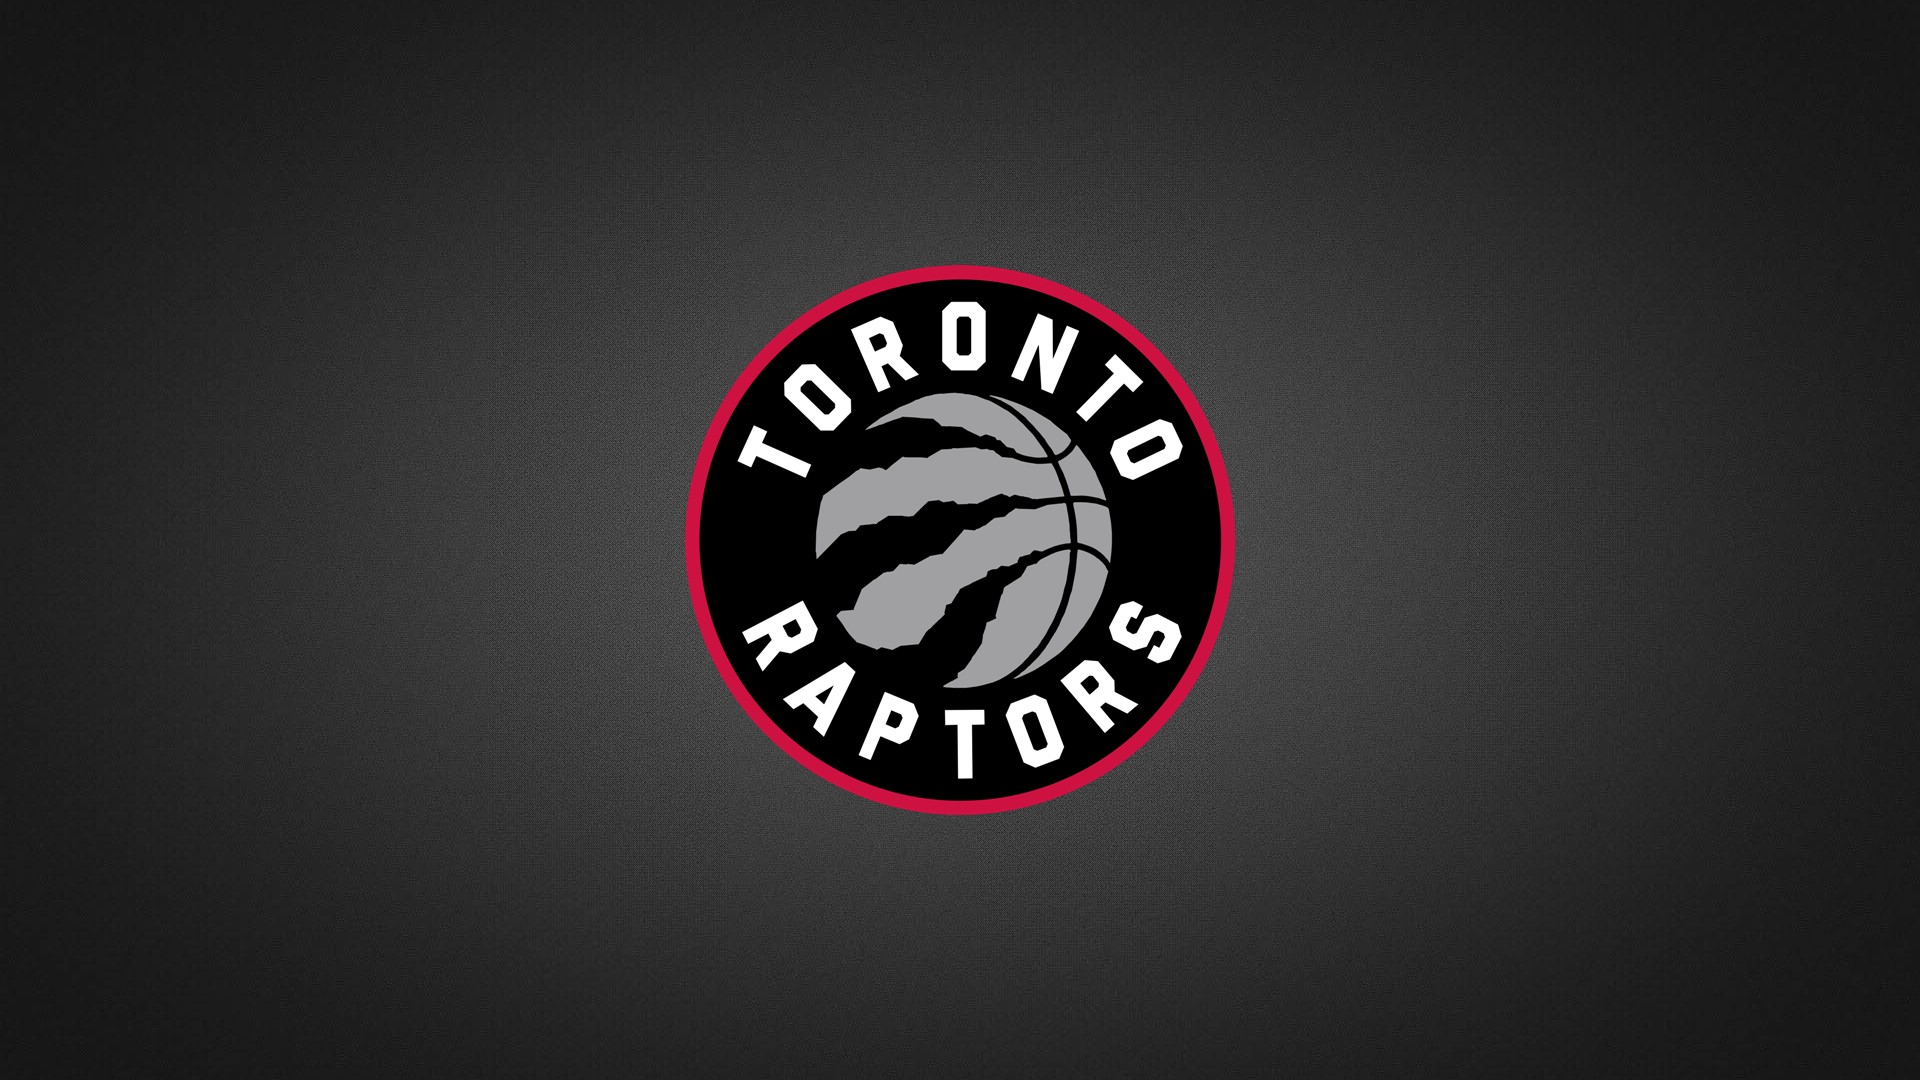 HD Backgrounds Raptors Basketball with image dimensions 1920x1080 pixel. You can make this wallpaper for your Desktop Computer Backgrounds, Windows or Mac Screensavers, iPhone Lock screen, Tablet or Android and another Mobile Phone device